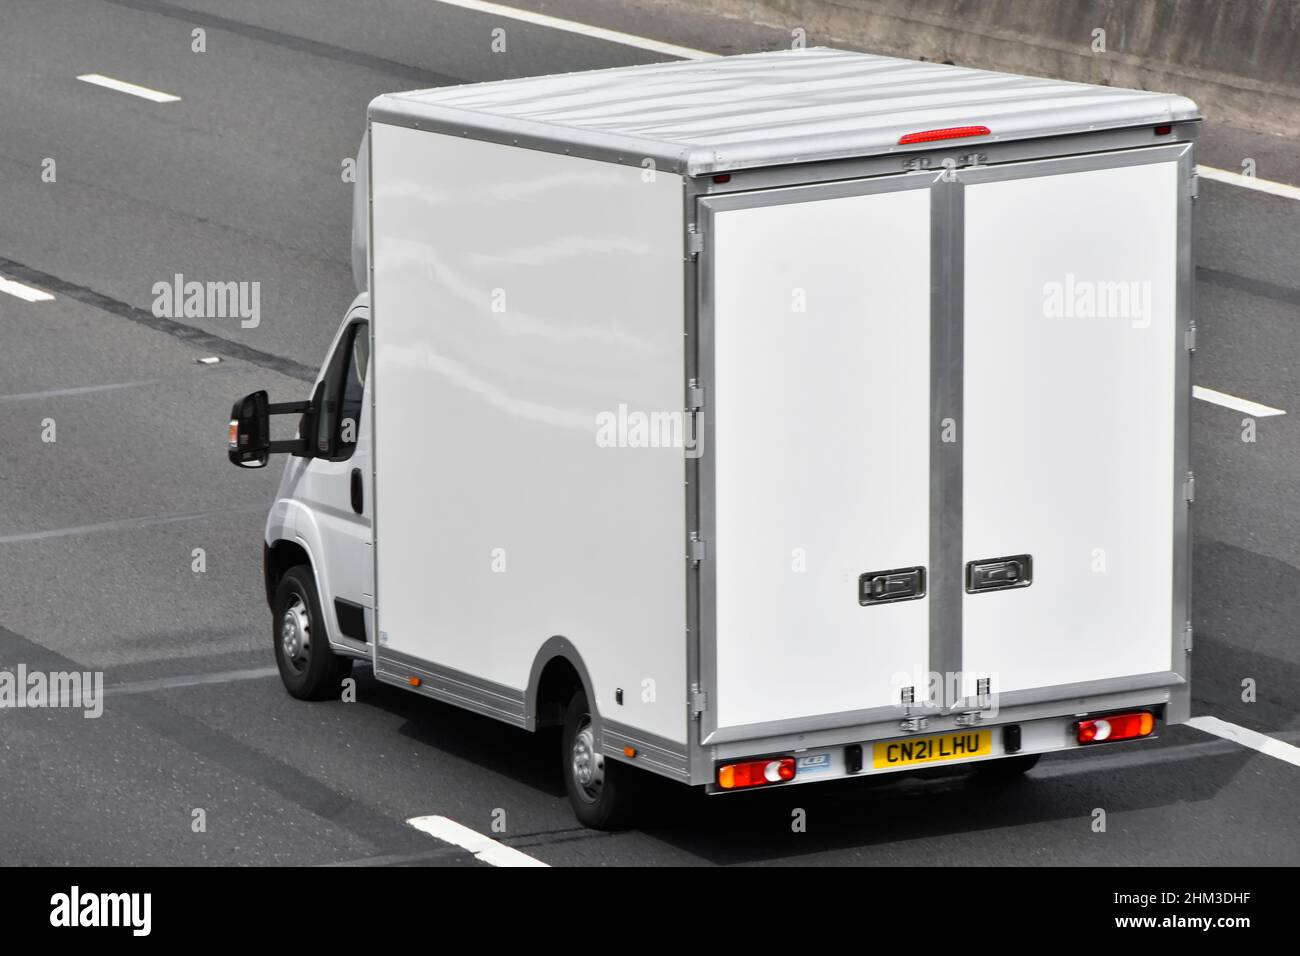 Back side & aerial view of square shape all white clean box van with back doors built onto a white standard chassis cab vehicle on UK motorway road Stock Photo